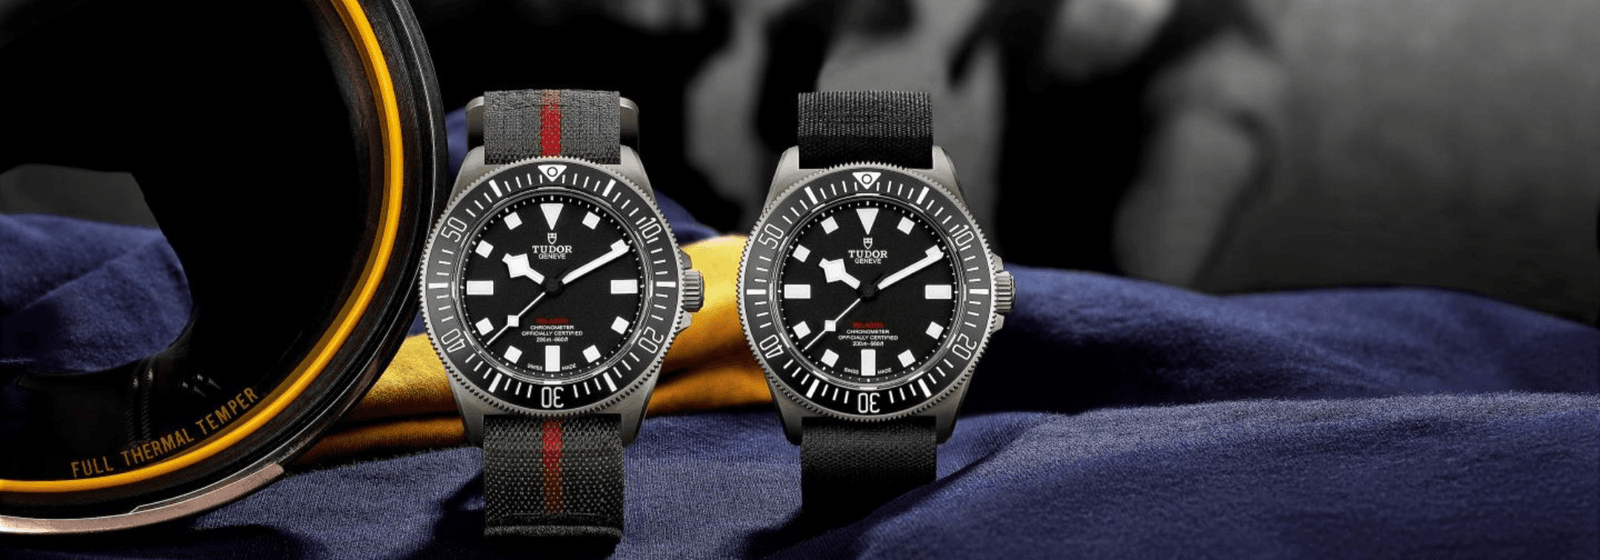 Craving Vintage Military Style? Tudor's Pelagos FXD Delivers